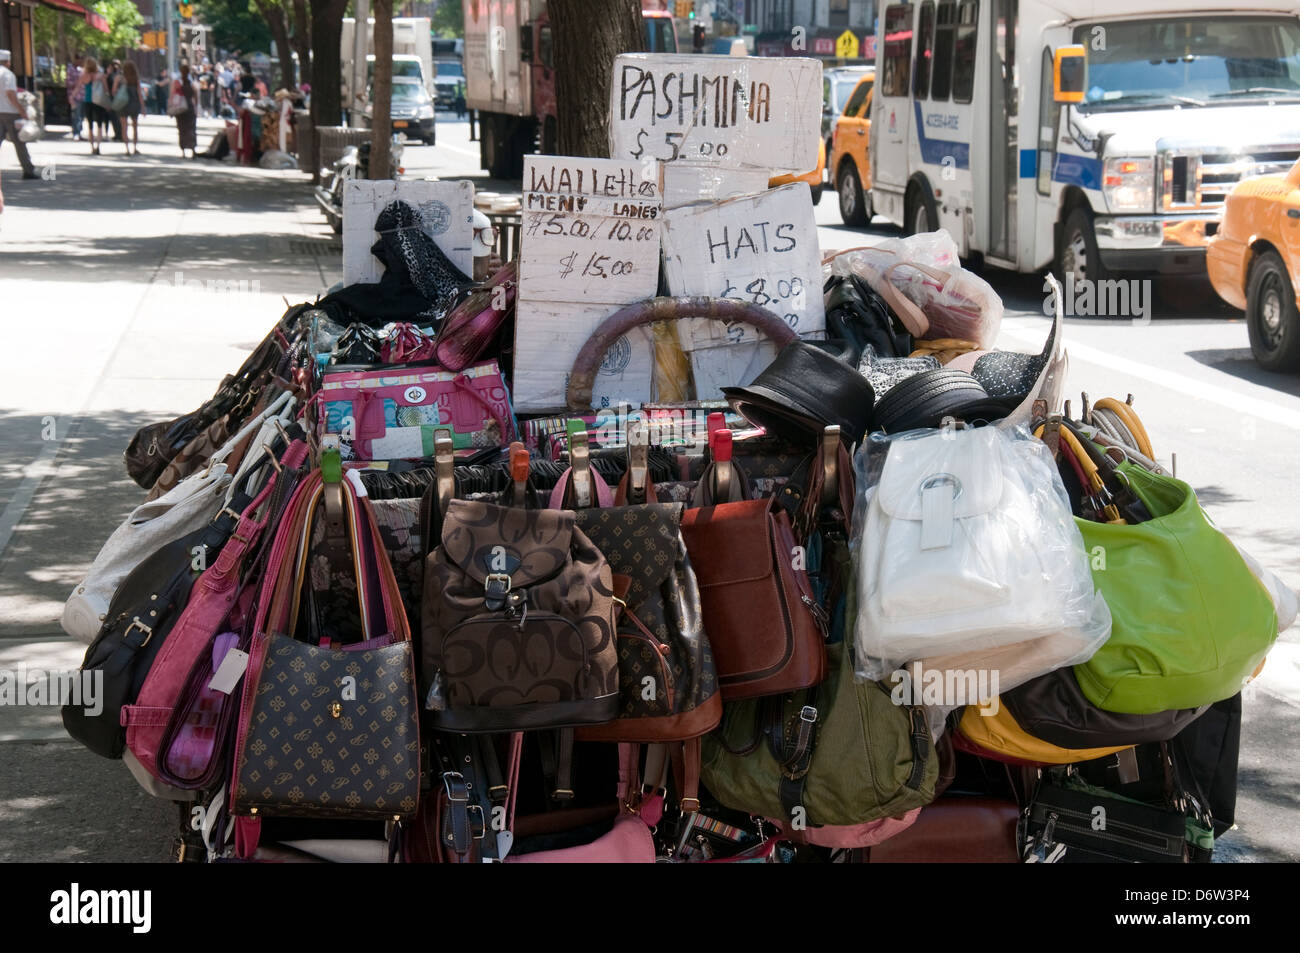 Bags for sale by a street vendor in New York City, USA Stock Photo